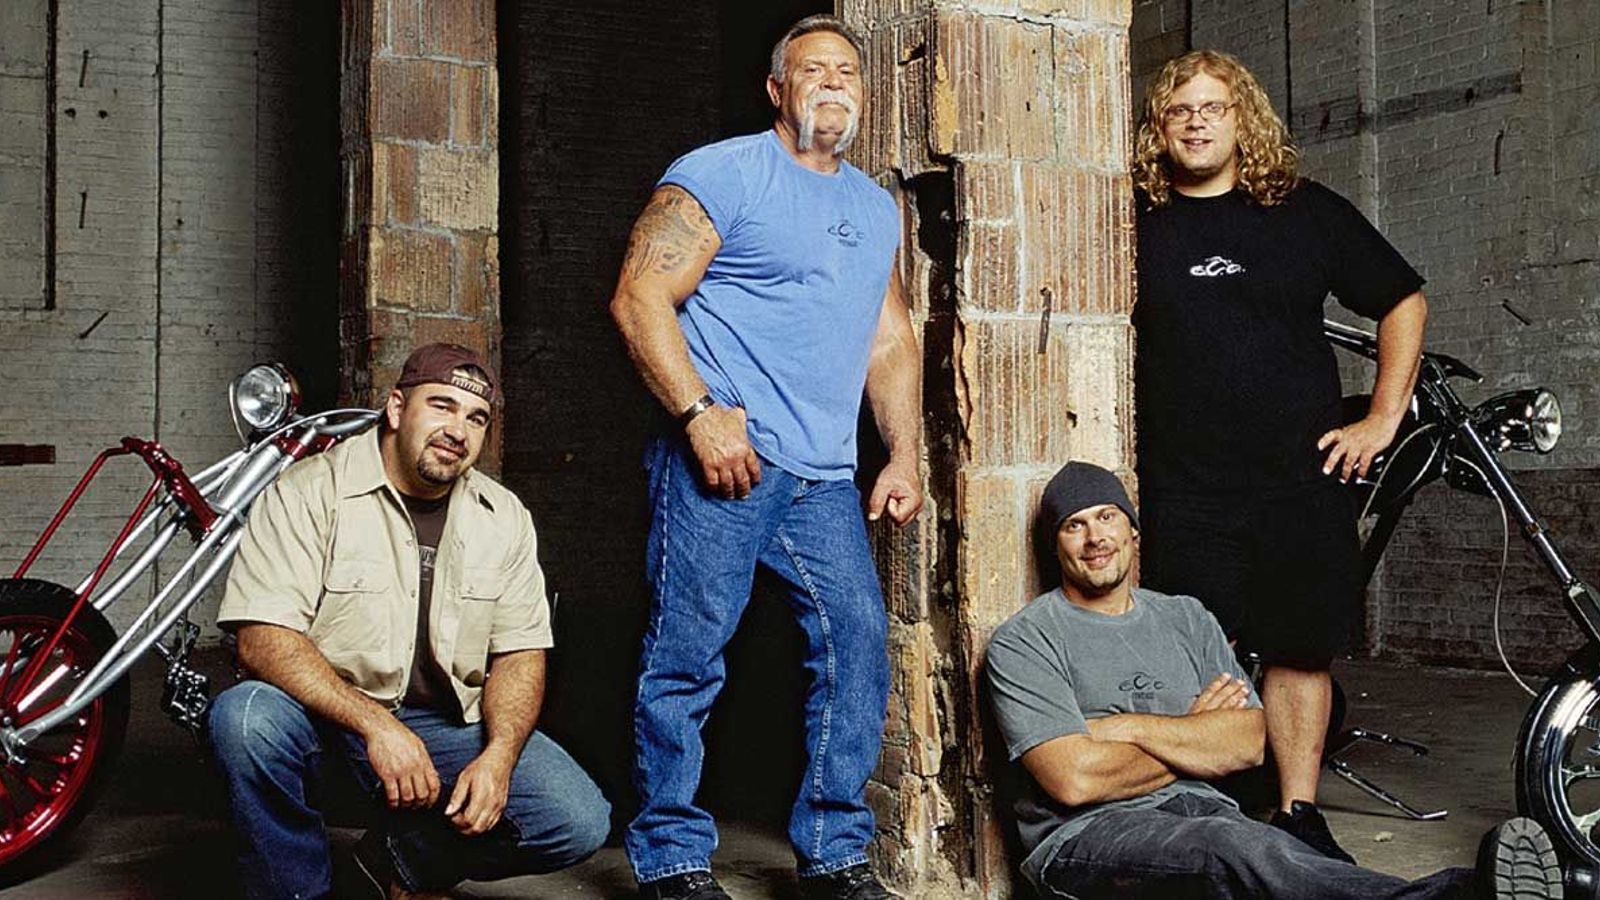 Heres What The Original Cast Of American Chopper Is Up To Today